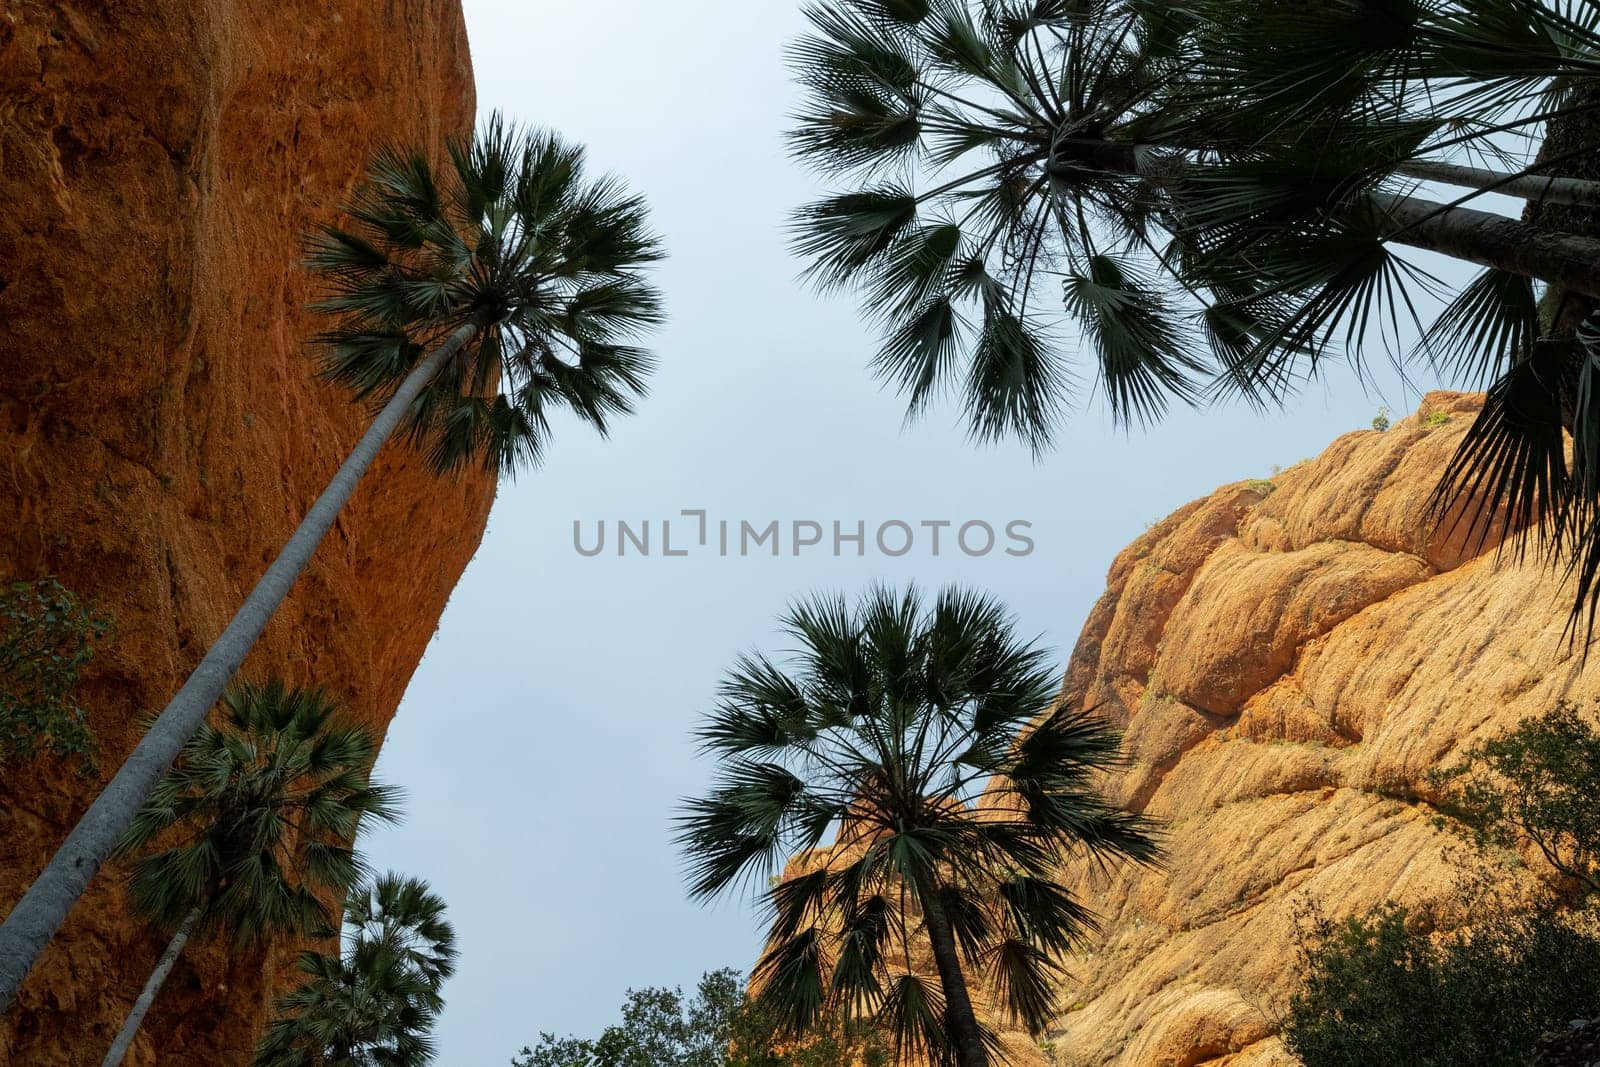 Looking up at tall palm trees against orange rocks in a gorge in WA by StefanMal